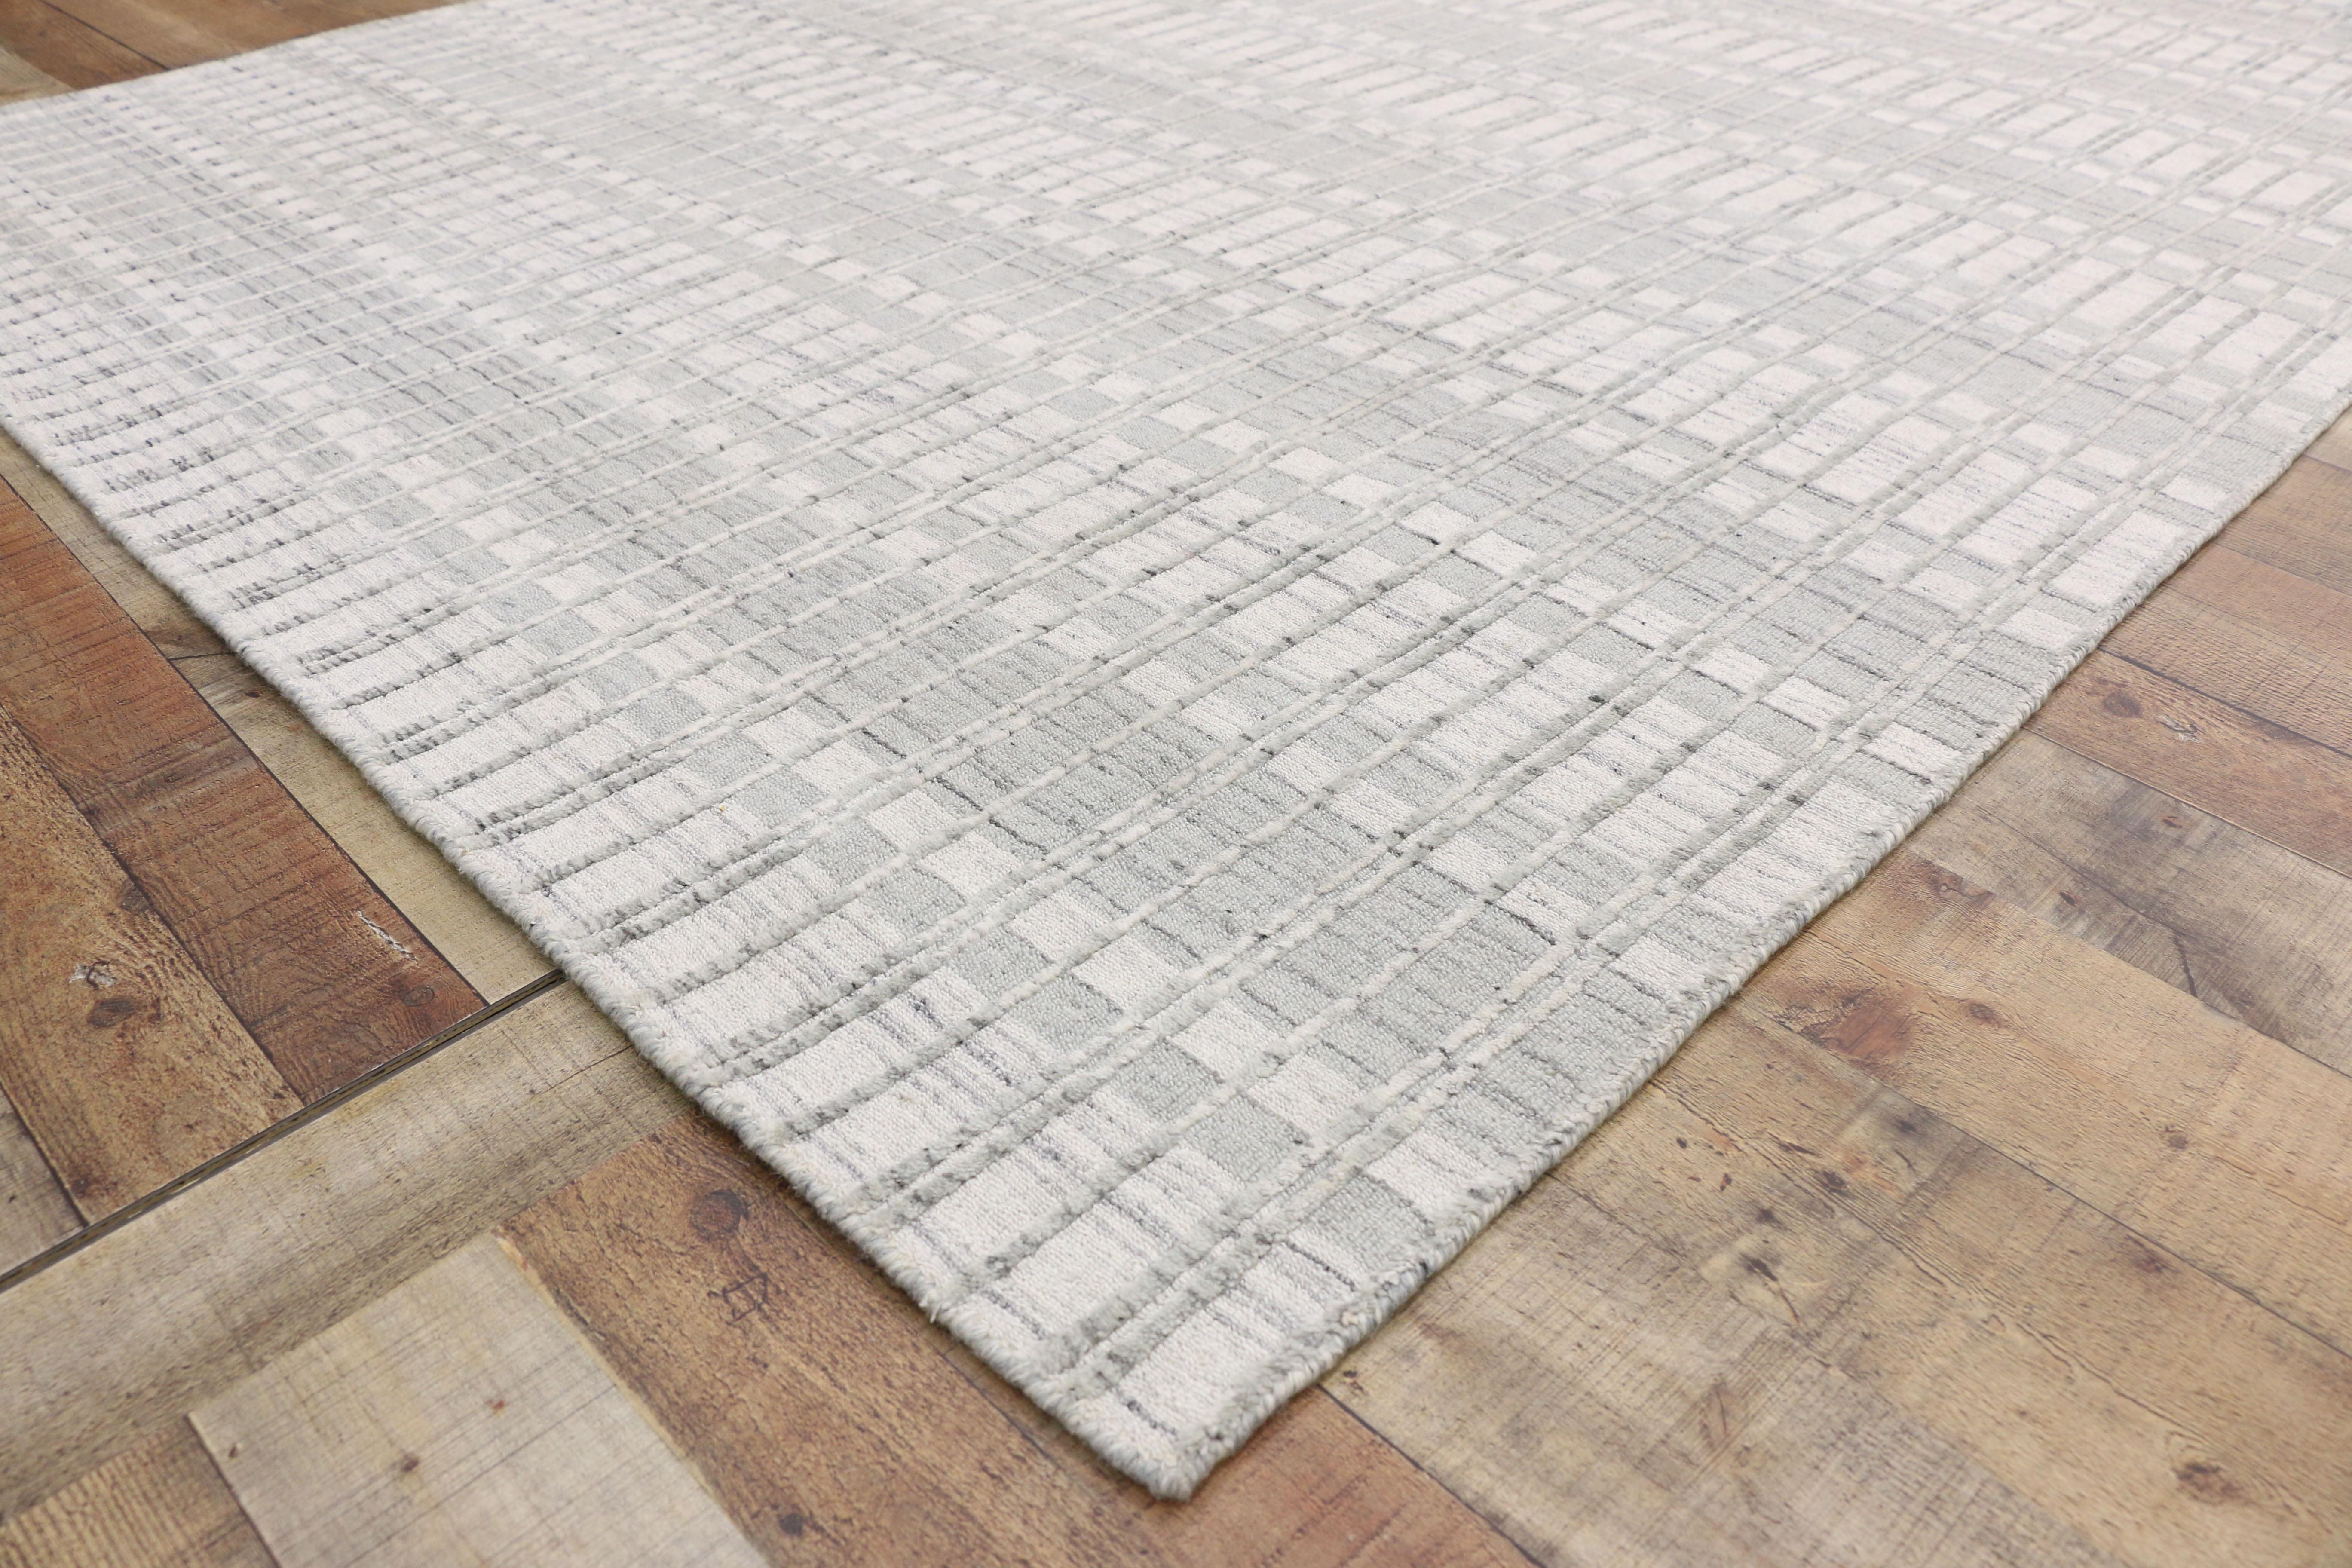 New Transitional Gray Area Rug with Scandinavian Modern Swedish Style In New Condition For Sale In Dallas, TX